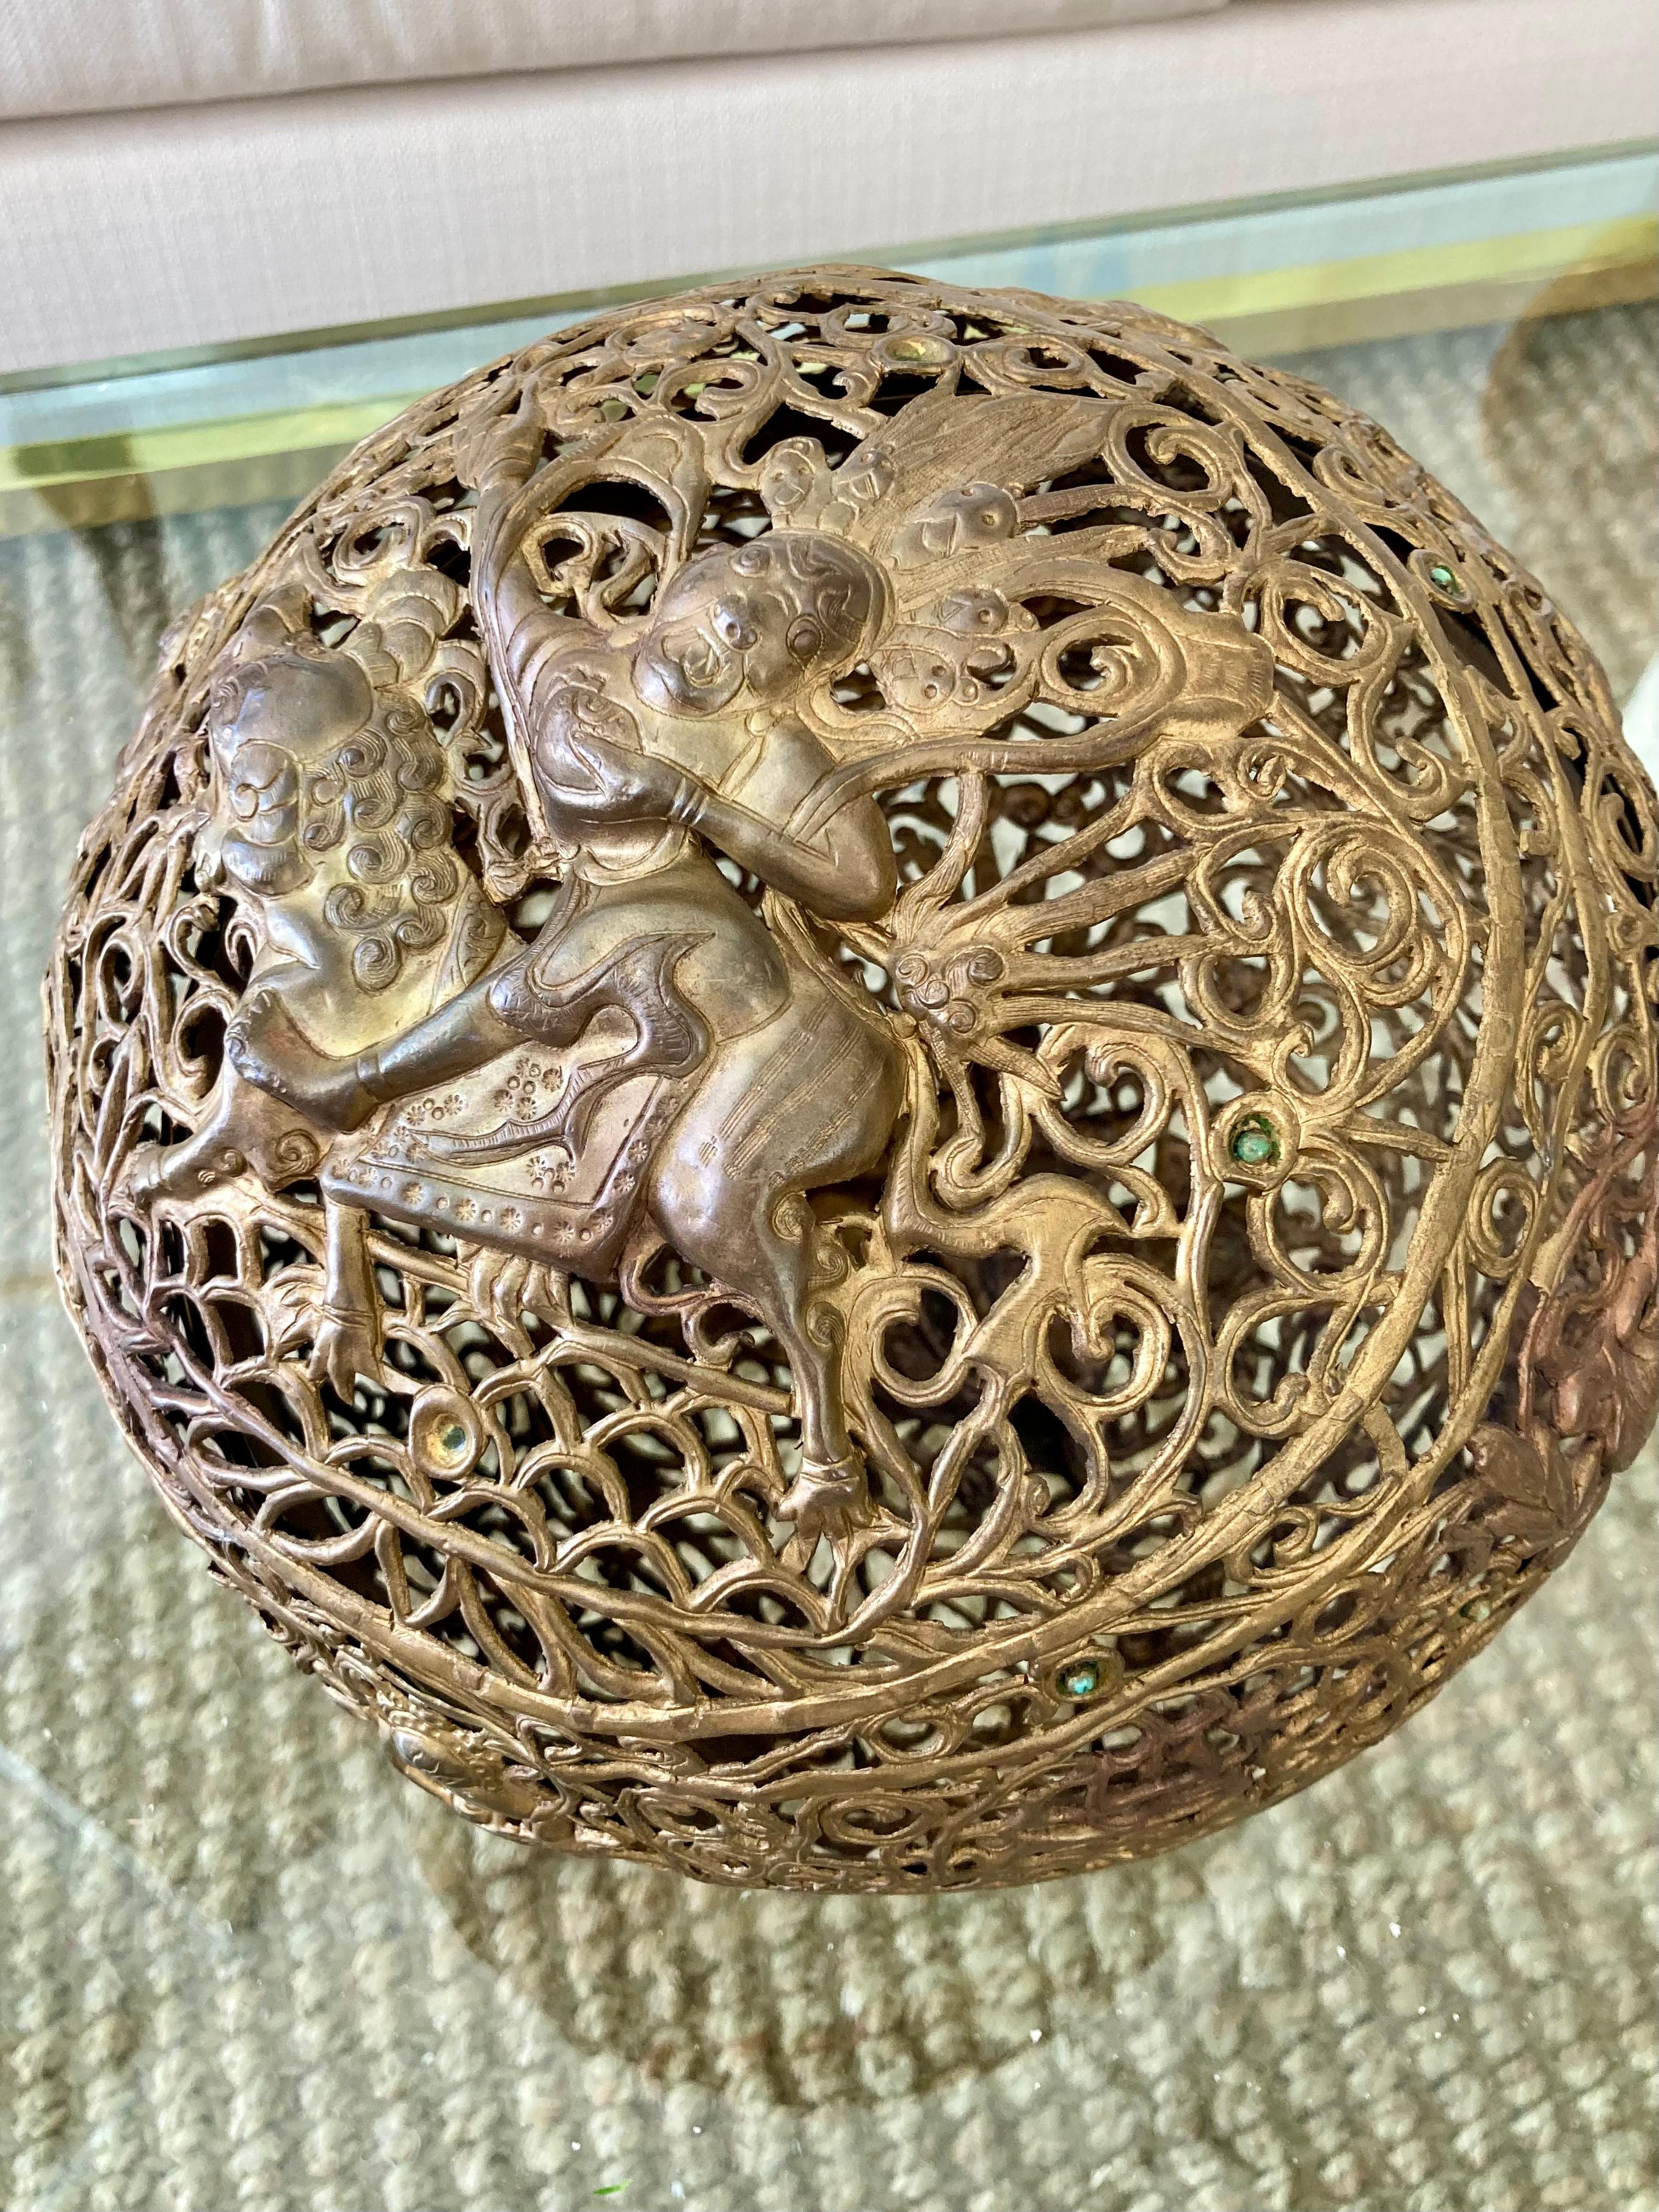 Beautiful large Asian brass ball inciense holder. We have a slightly bigger piece in our inventory so collect both! From the estate of Tony Duquette.